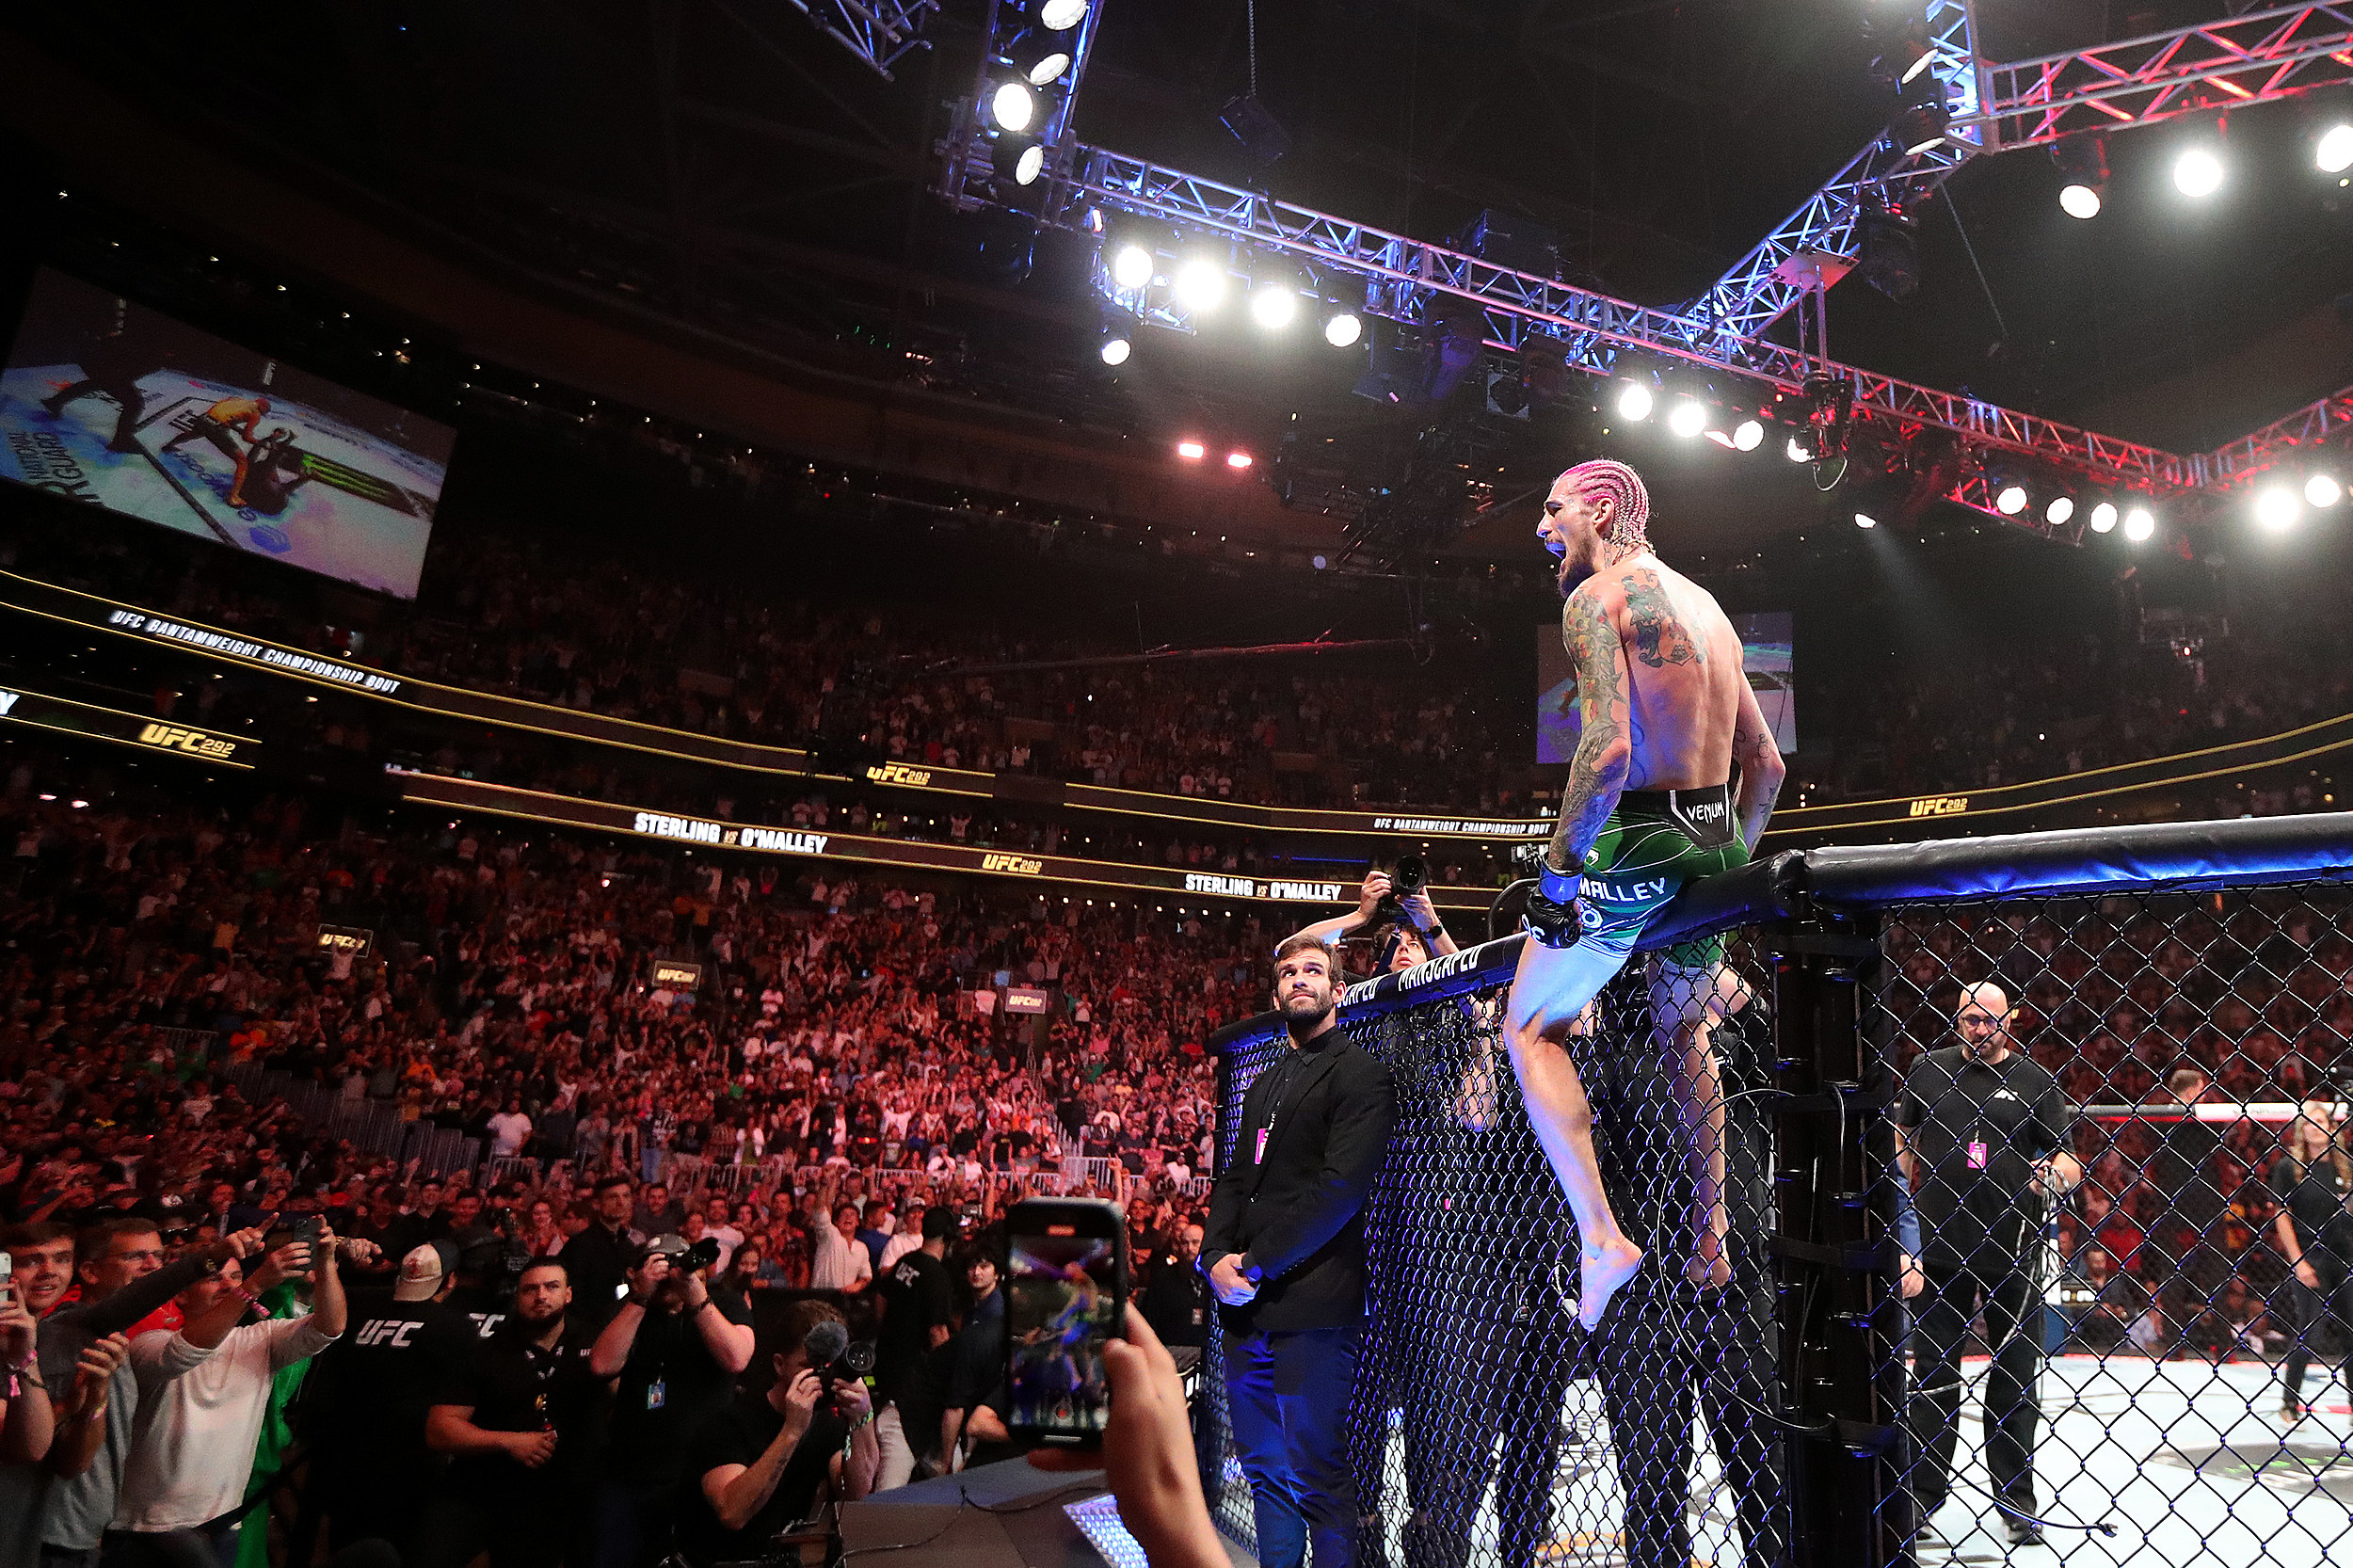 UFC 292 Venue: Is UFC 292 Taking Place at TD Garden in Boston